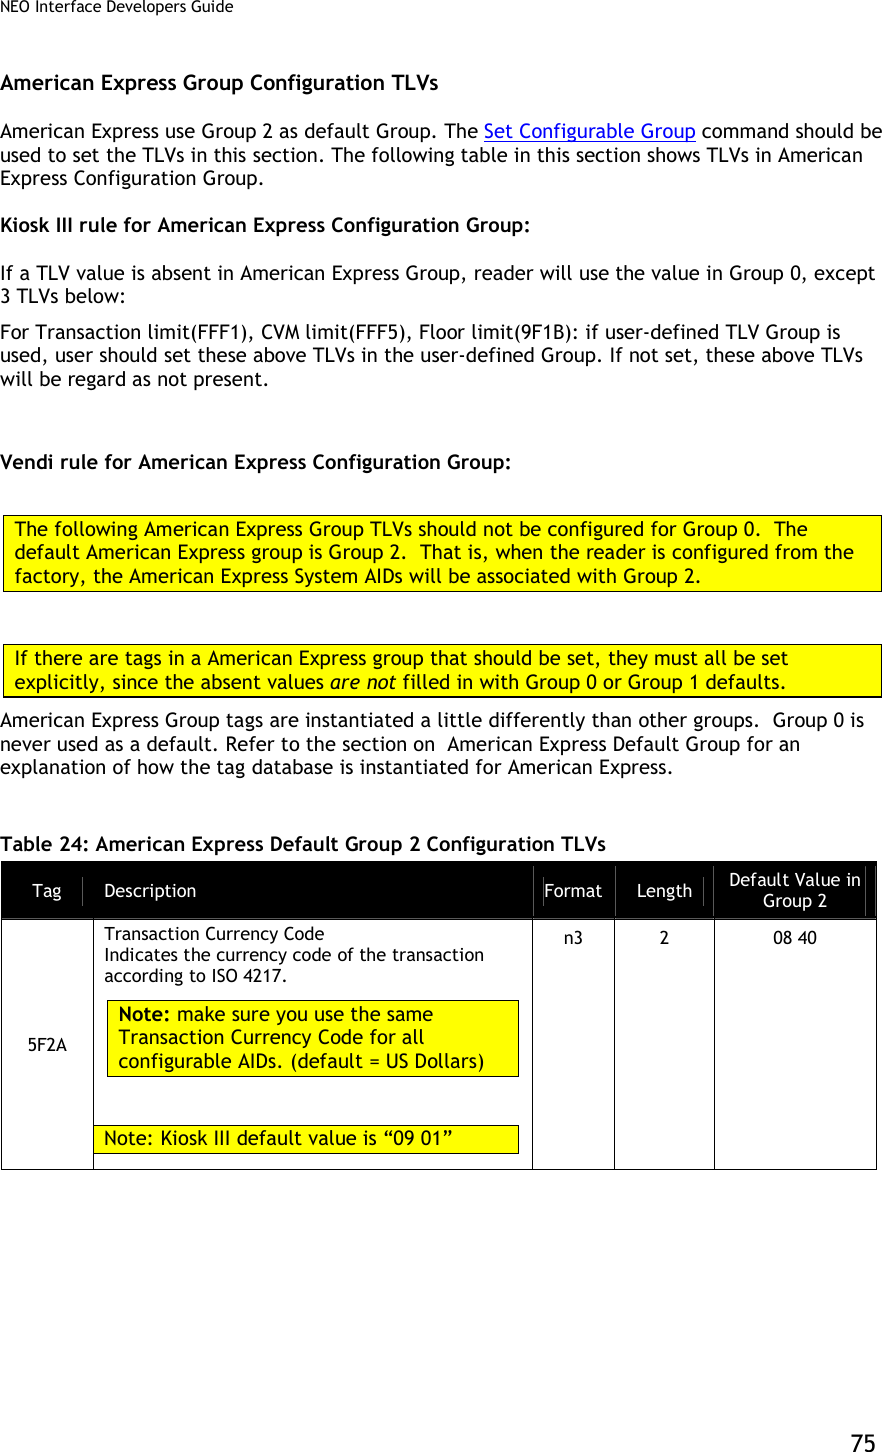 NEO Interface Developers Guide           75 American Express Group Configuration TLVs American Express use Group 2 as default Group. The Set Configurable Group command should be used to set the TLVs in this section. The following table in this section shows TLVs in American Express Configuration Group.  Kiosk III rule for American Express Configuration Group:  If a TLV value is absent in American Express Group, reader will use the value in Group 0, except 3 TLVs below: For Transaction limit(FFF1), CVM limit(FFF5), Floor limit(9F1B): if user-defined TLV Group is used, user should set these above TLVs in the user-defined Group. If not set, these above TLVs will be regard as not present.   Vendi rule for American Express Configuration Group:  The following American Express Group TLVs should not be configured for Group 0.  The default American Express group is Group 2.  That is, when the reader is configured from the factory, the American Express System AIDs will be associated with Group 2.  If there are tags in a American Express group that should be set, they must all be set explicitly, since the absent values are not filled in with Group 0 or Group 1 defaults. American Express Group tags are instantiated a little differently than other groups.  Group 0 is never used as a default. Refer to the section on  American Express Default Group for an explanation of how the tag database is instantiated for American Express.  Table 24: American Express Default Group 2 Configuration TLVs Tag  Description  Format Length  Default Value in Group 2 5F2A Transaction Currency Code  Indicates the currency code of the transaction according to ISO 4217.  Note: make sure you use the same Transaction Currency Code for all configurable AIDs. (default = US Dollars)   Note: Kiosk III default value is “09 01” n3  2  08 40 